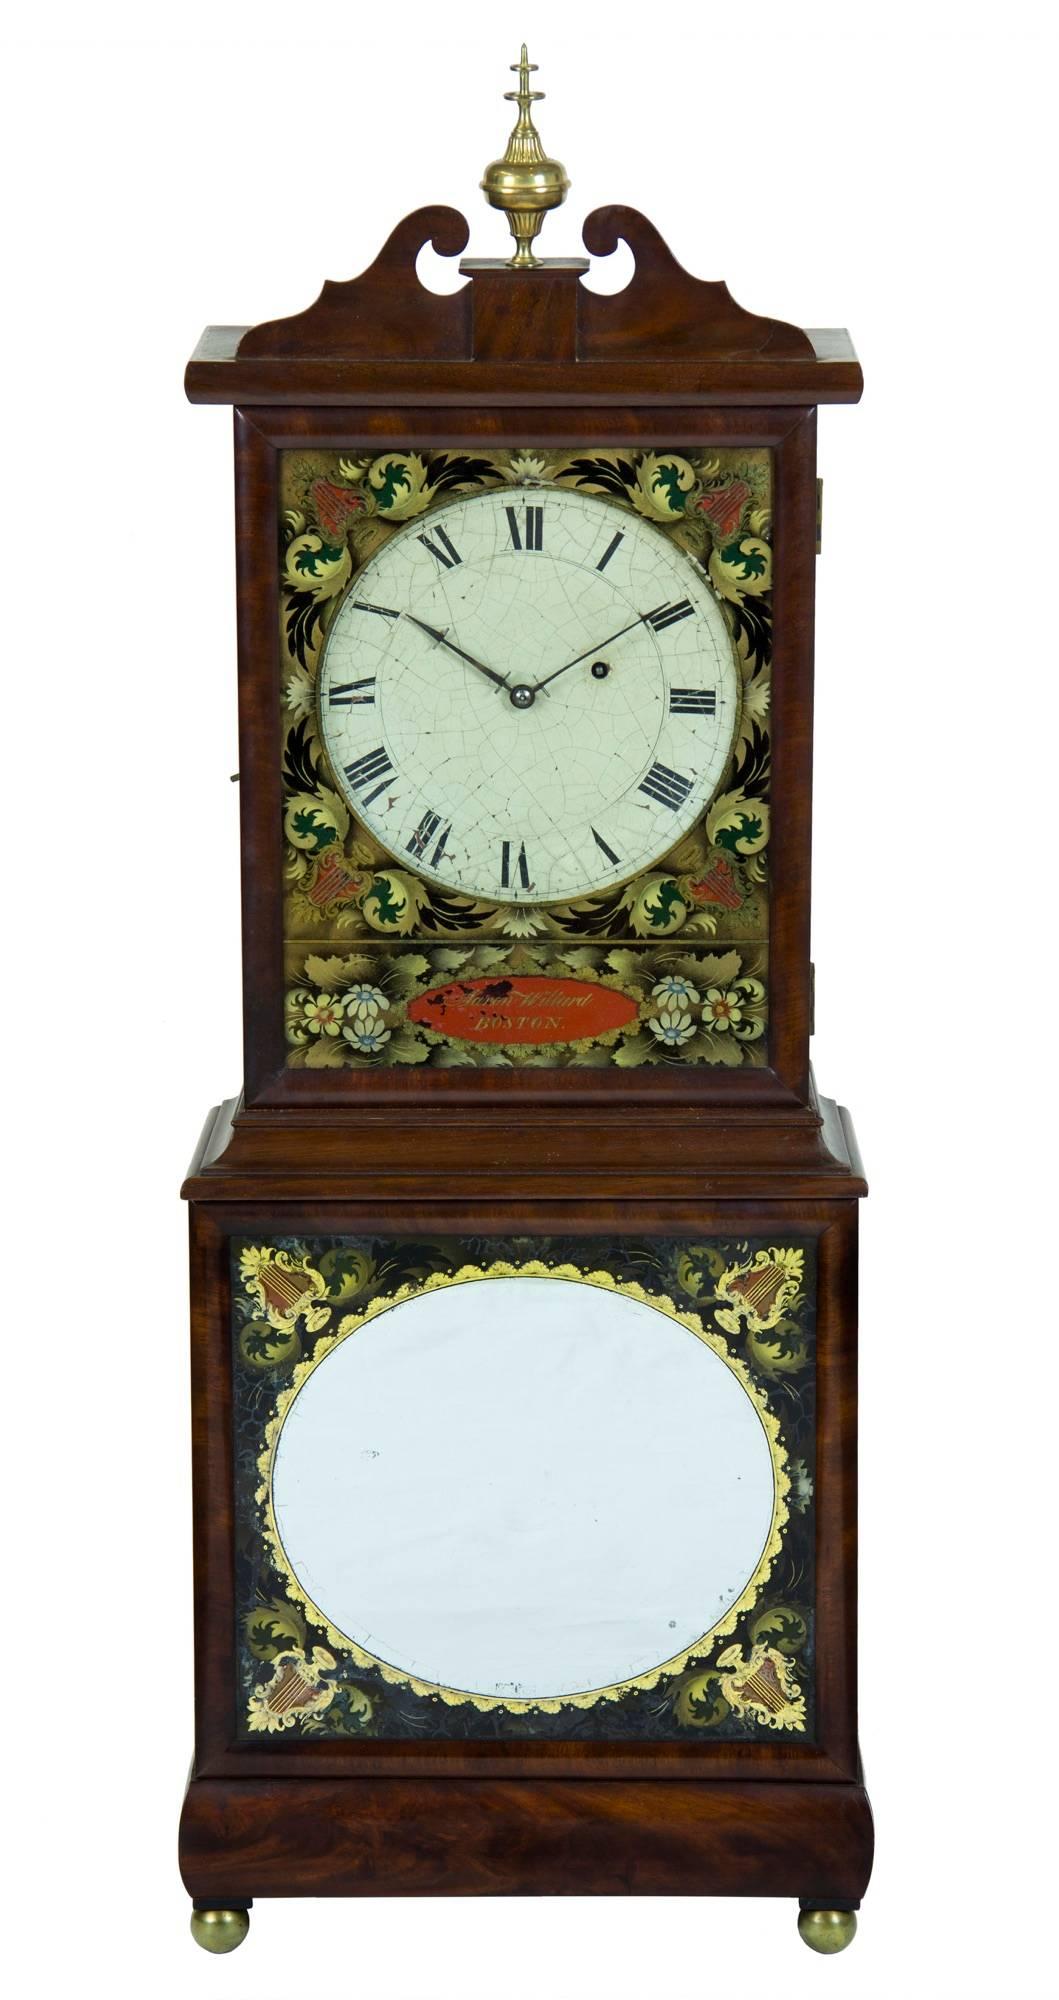 This is a beautiful, pure example of the classic New England shelf clock.  The dial and hands are all original, as are the finial, glass et al.  The case has a beautiful, historic, and untouched countenance to it, and is a fine example of the form,